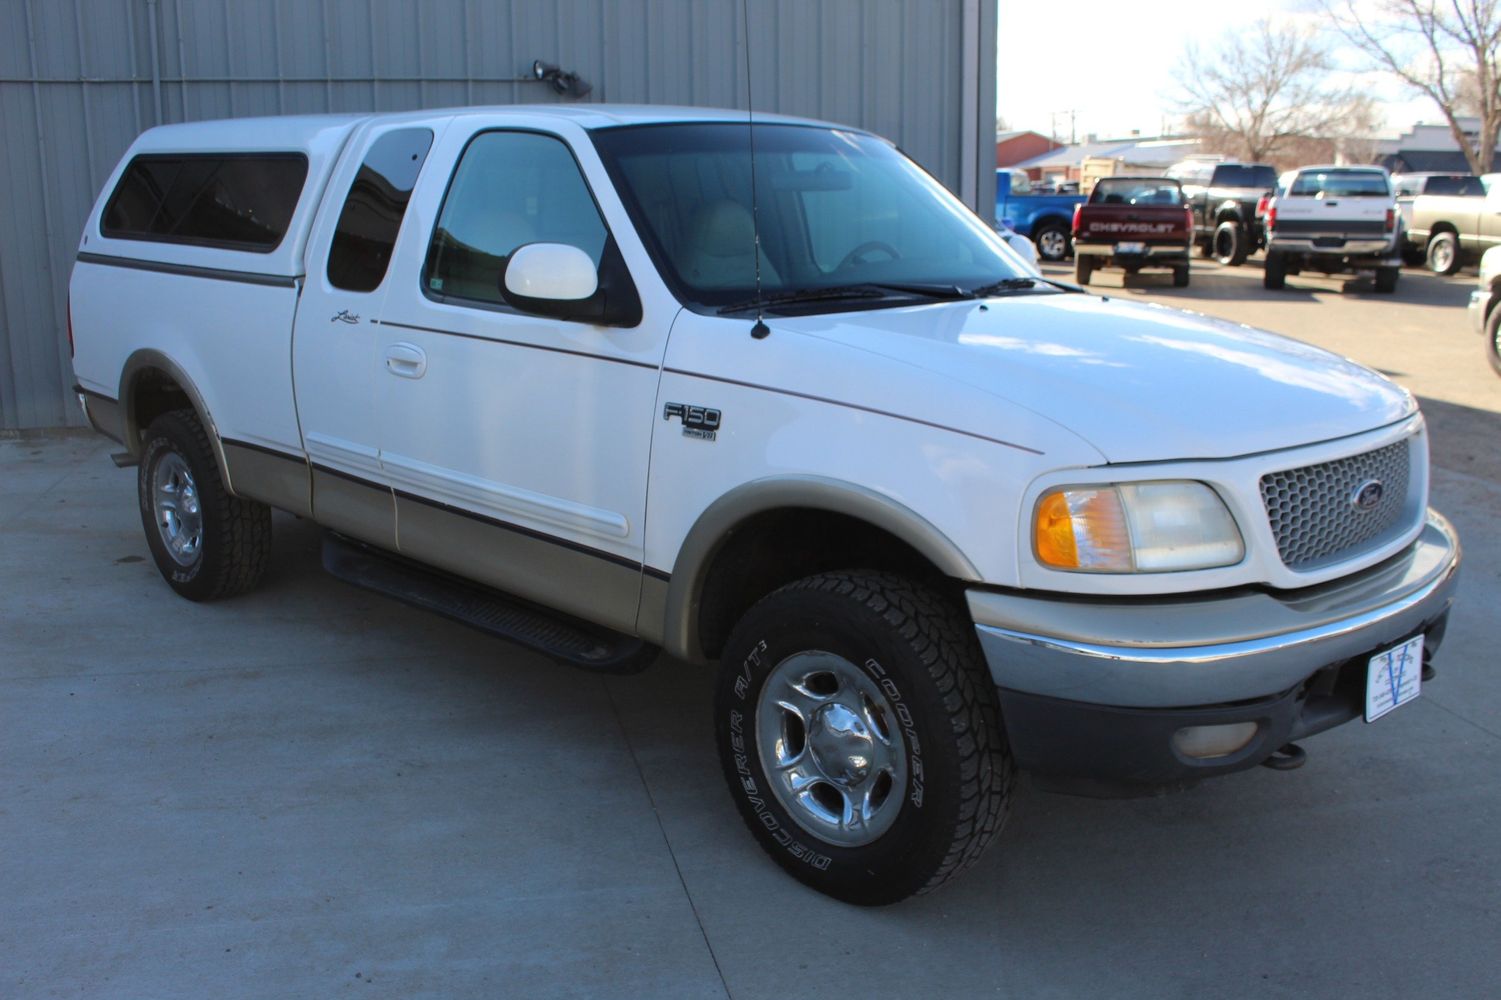 1999 Ford F-150 Lariat | Victory Motors of Colorado 1999 Ford F150 4.6 V8 Towing Capacity